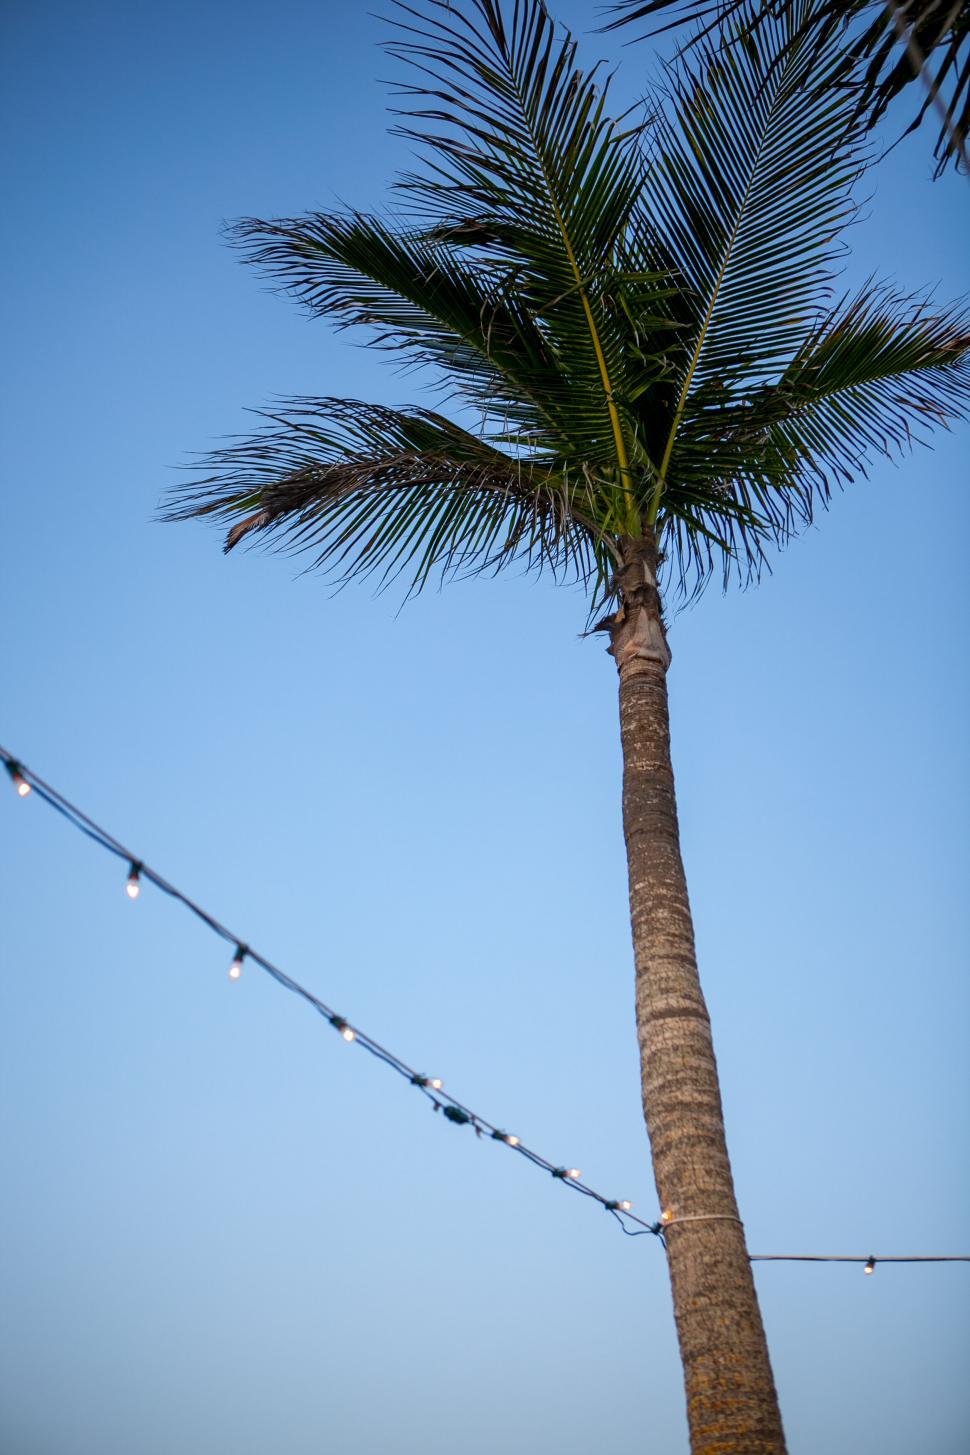 Free Image of Palm tree with string lights against blue sky 